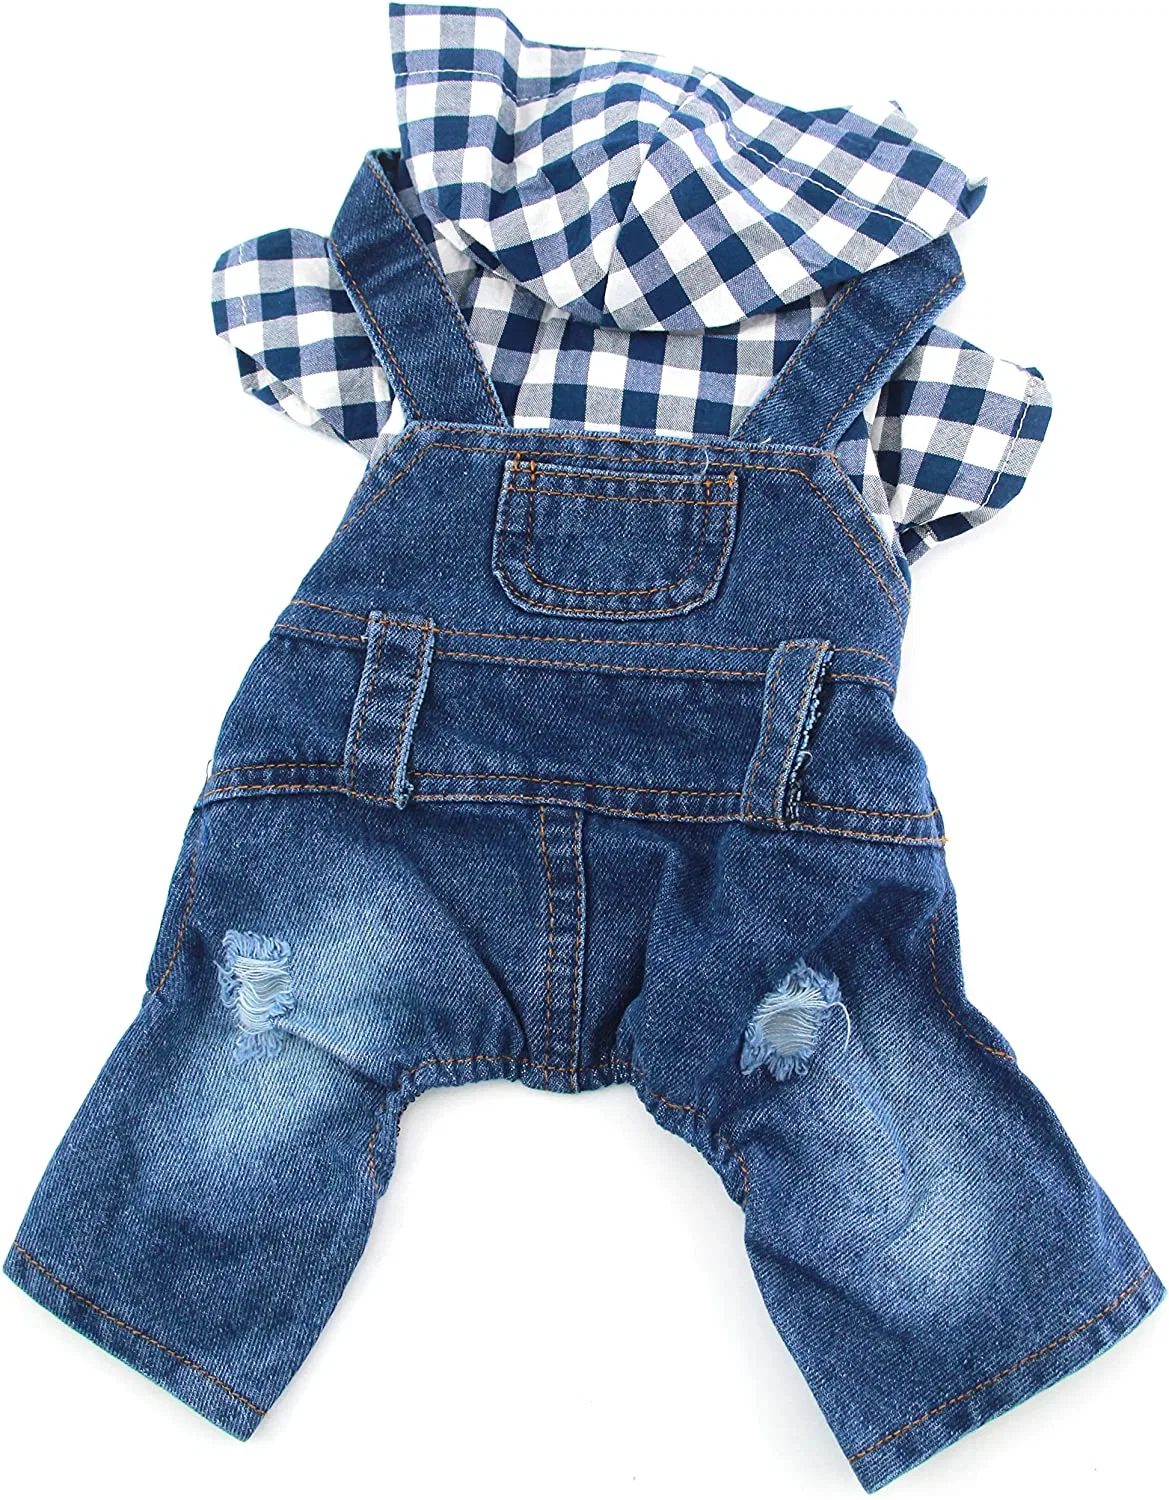 Fashion Denim Jumpsuit Dog Clothes with Plaid Hoodie for Puppy Jeans Jacket for Doggy Spring Summer Apparel Indoor and Outdoor